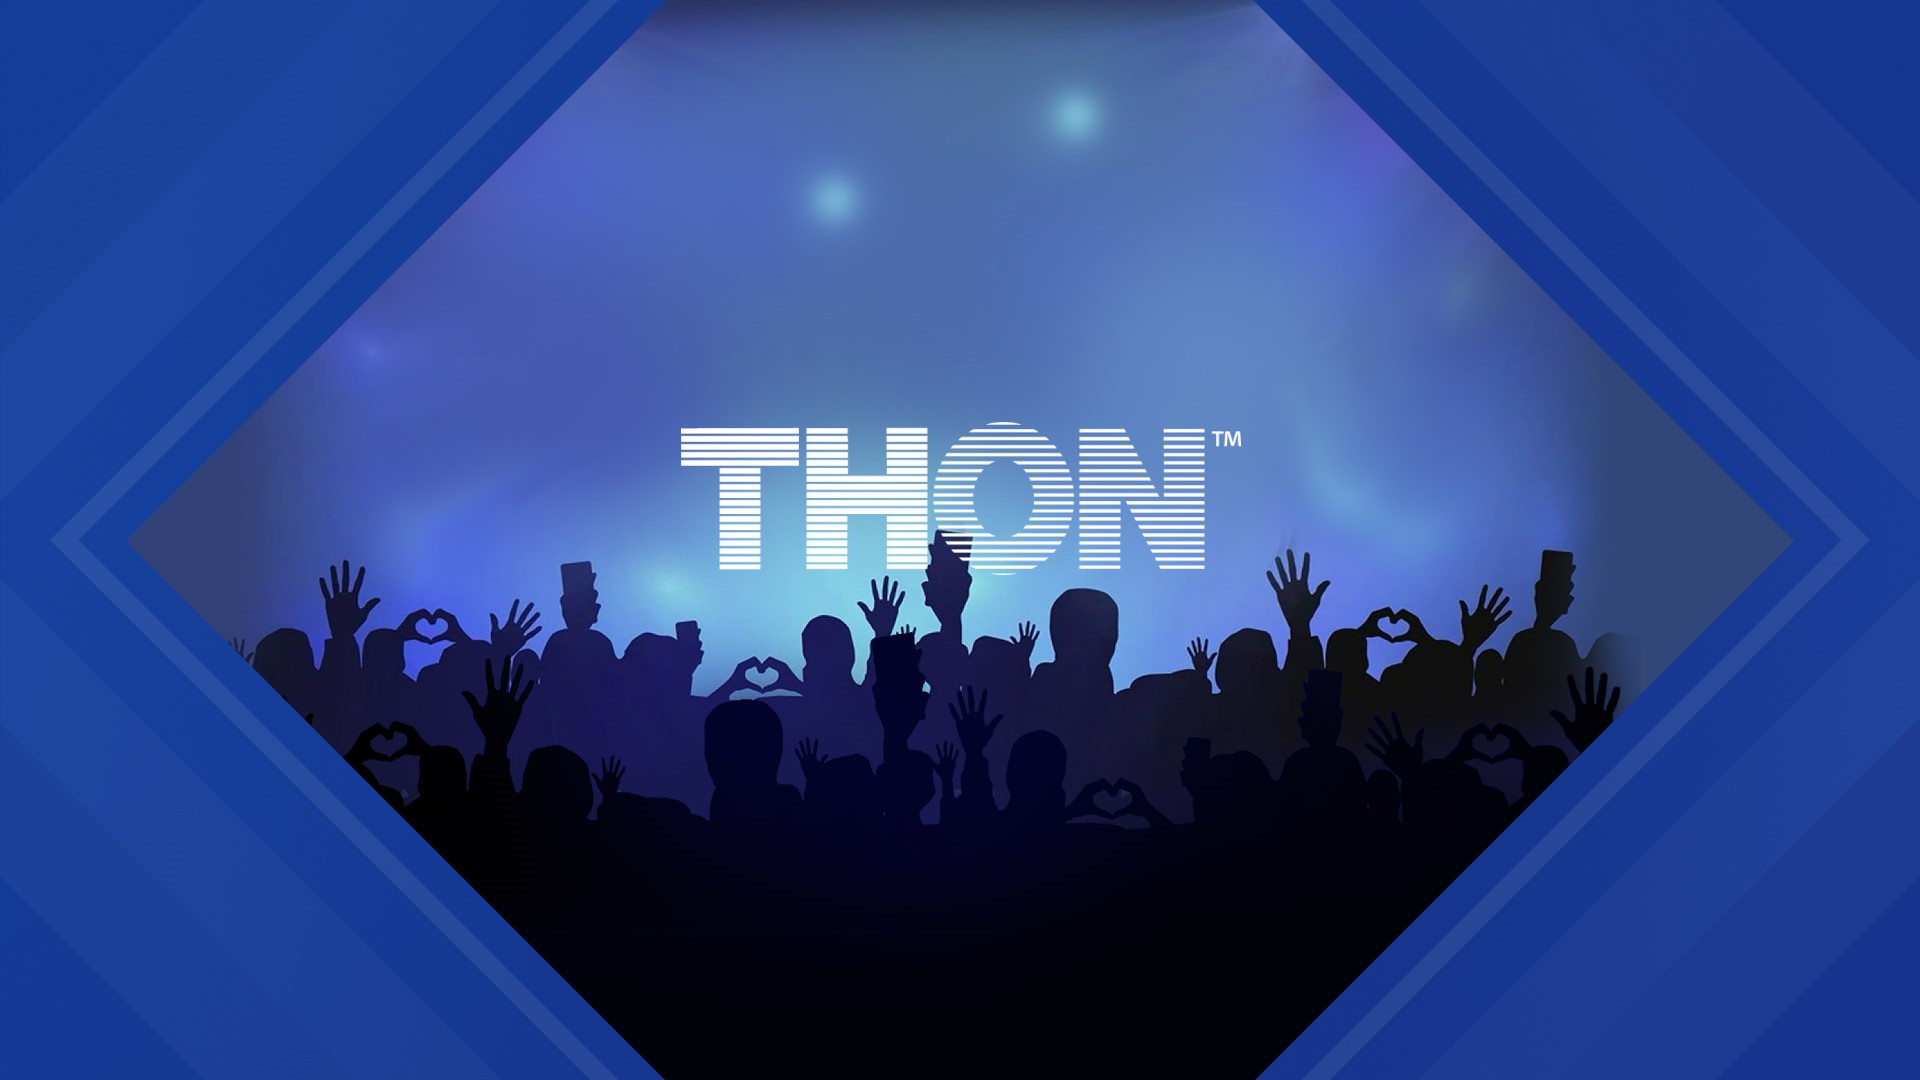 THON participants ready to lace up dancing shoes